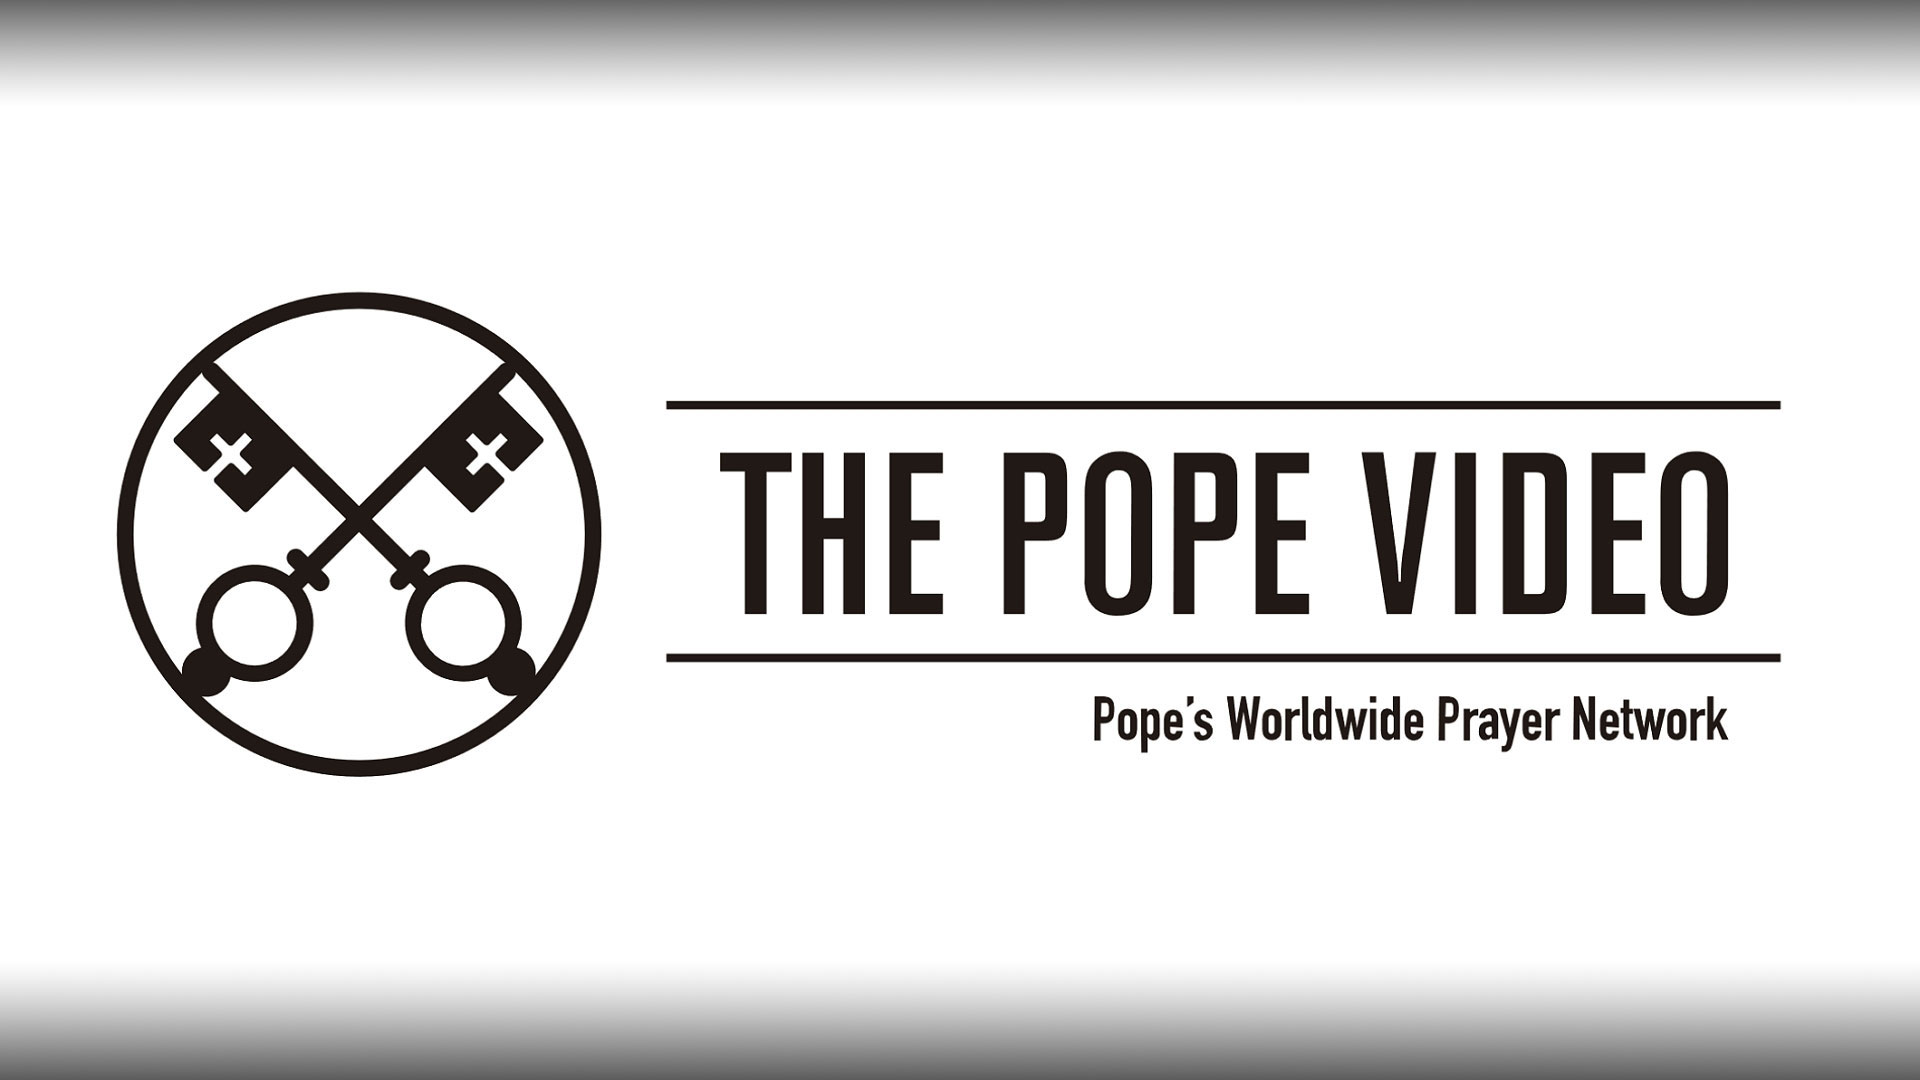 The beauty of marriage – The Pope Video